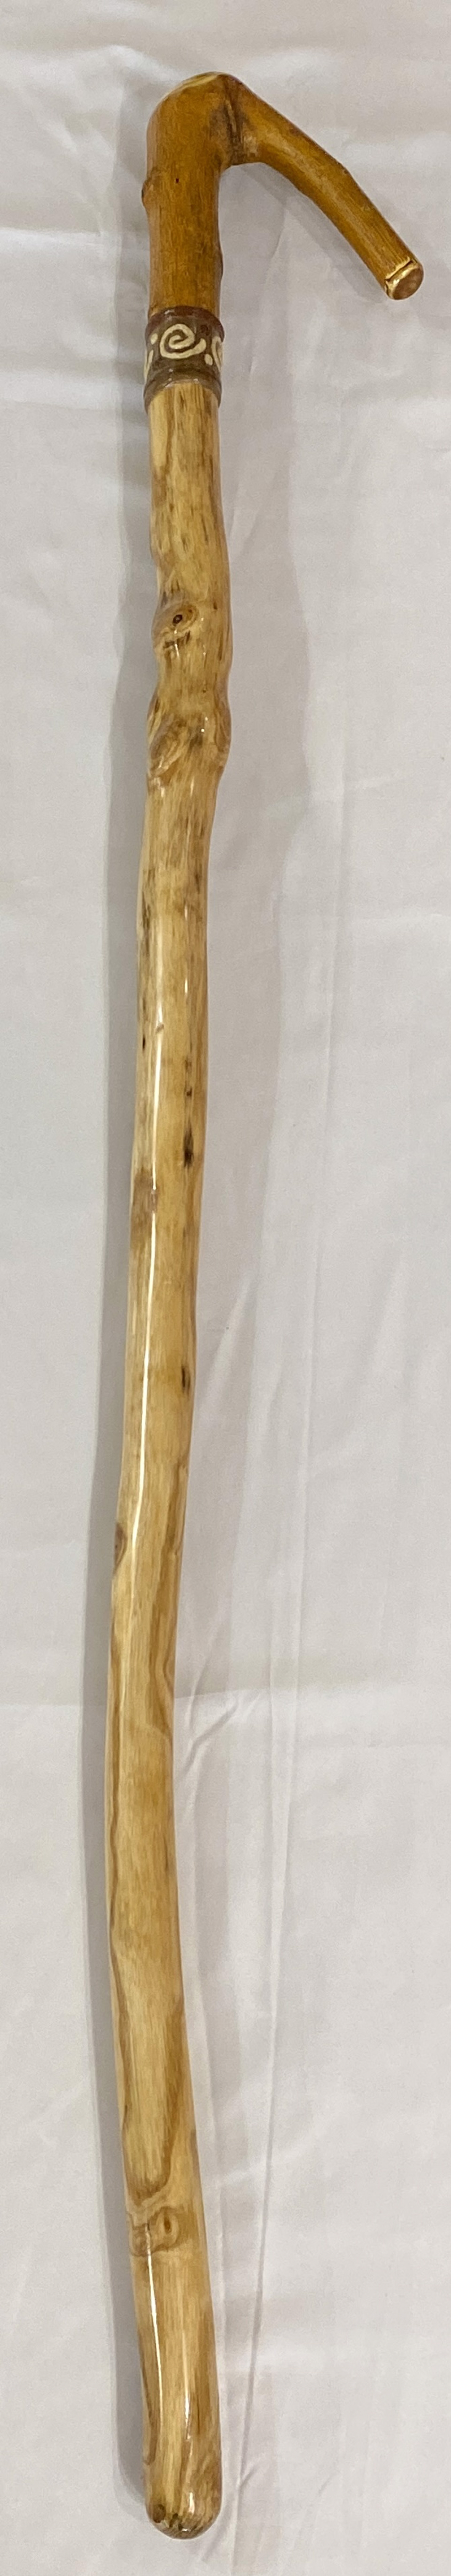 Wooden Walking Stick #12 by Kevin Foote